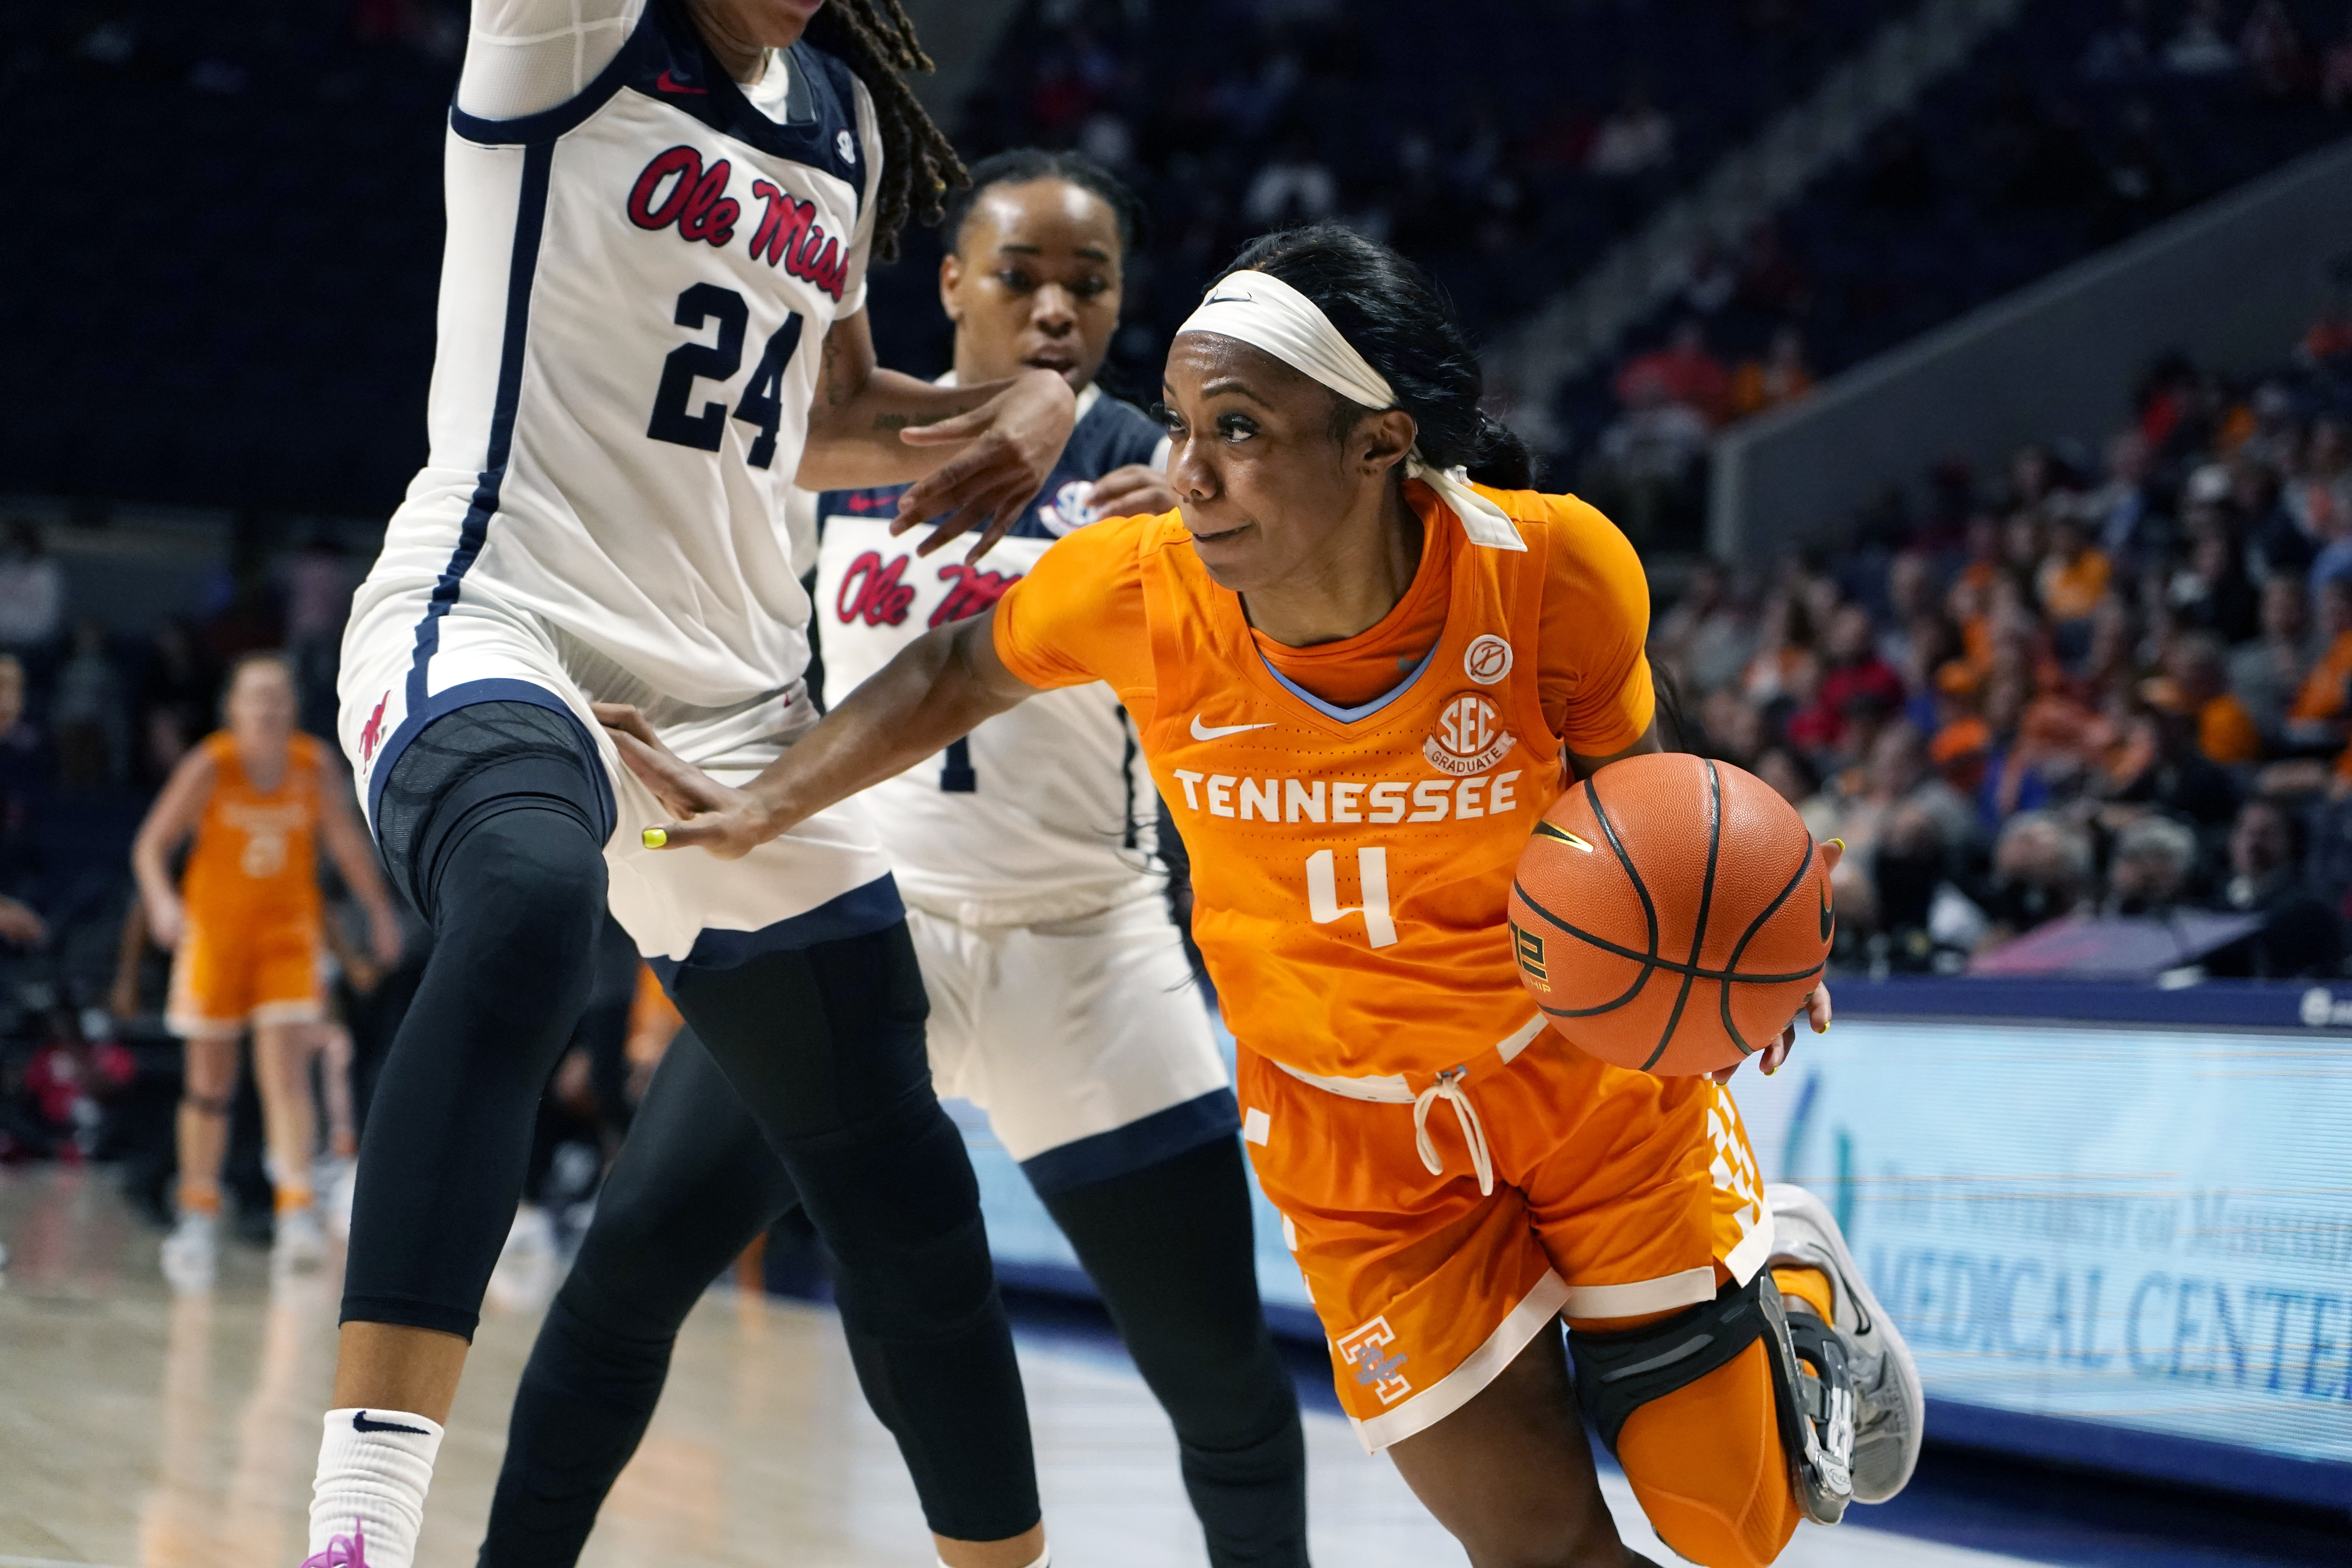 Lady Vols Basketball Schedule 2022 Kentucky Vs. Tennessee - Ncaa Women's Basketball (1/16/22) | Tip-Off, How  To Watch - Mlive.com